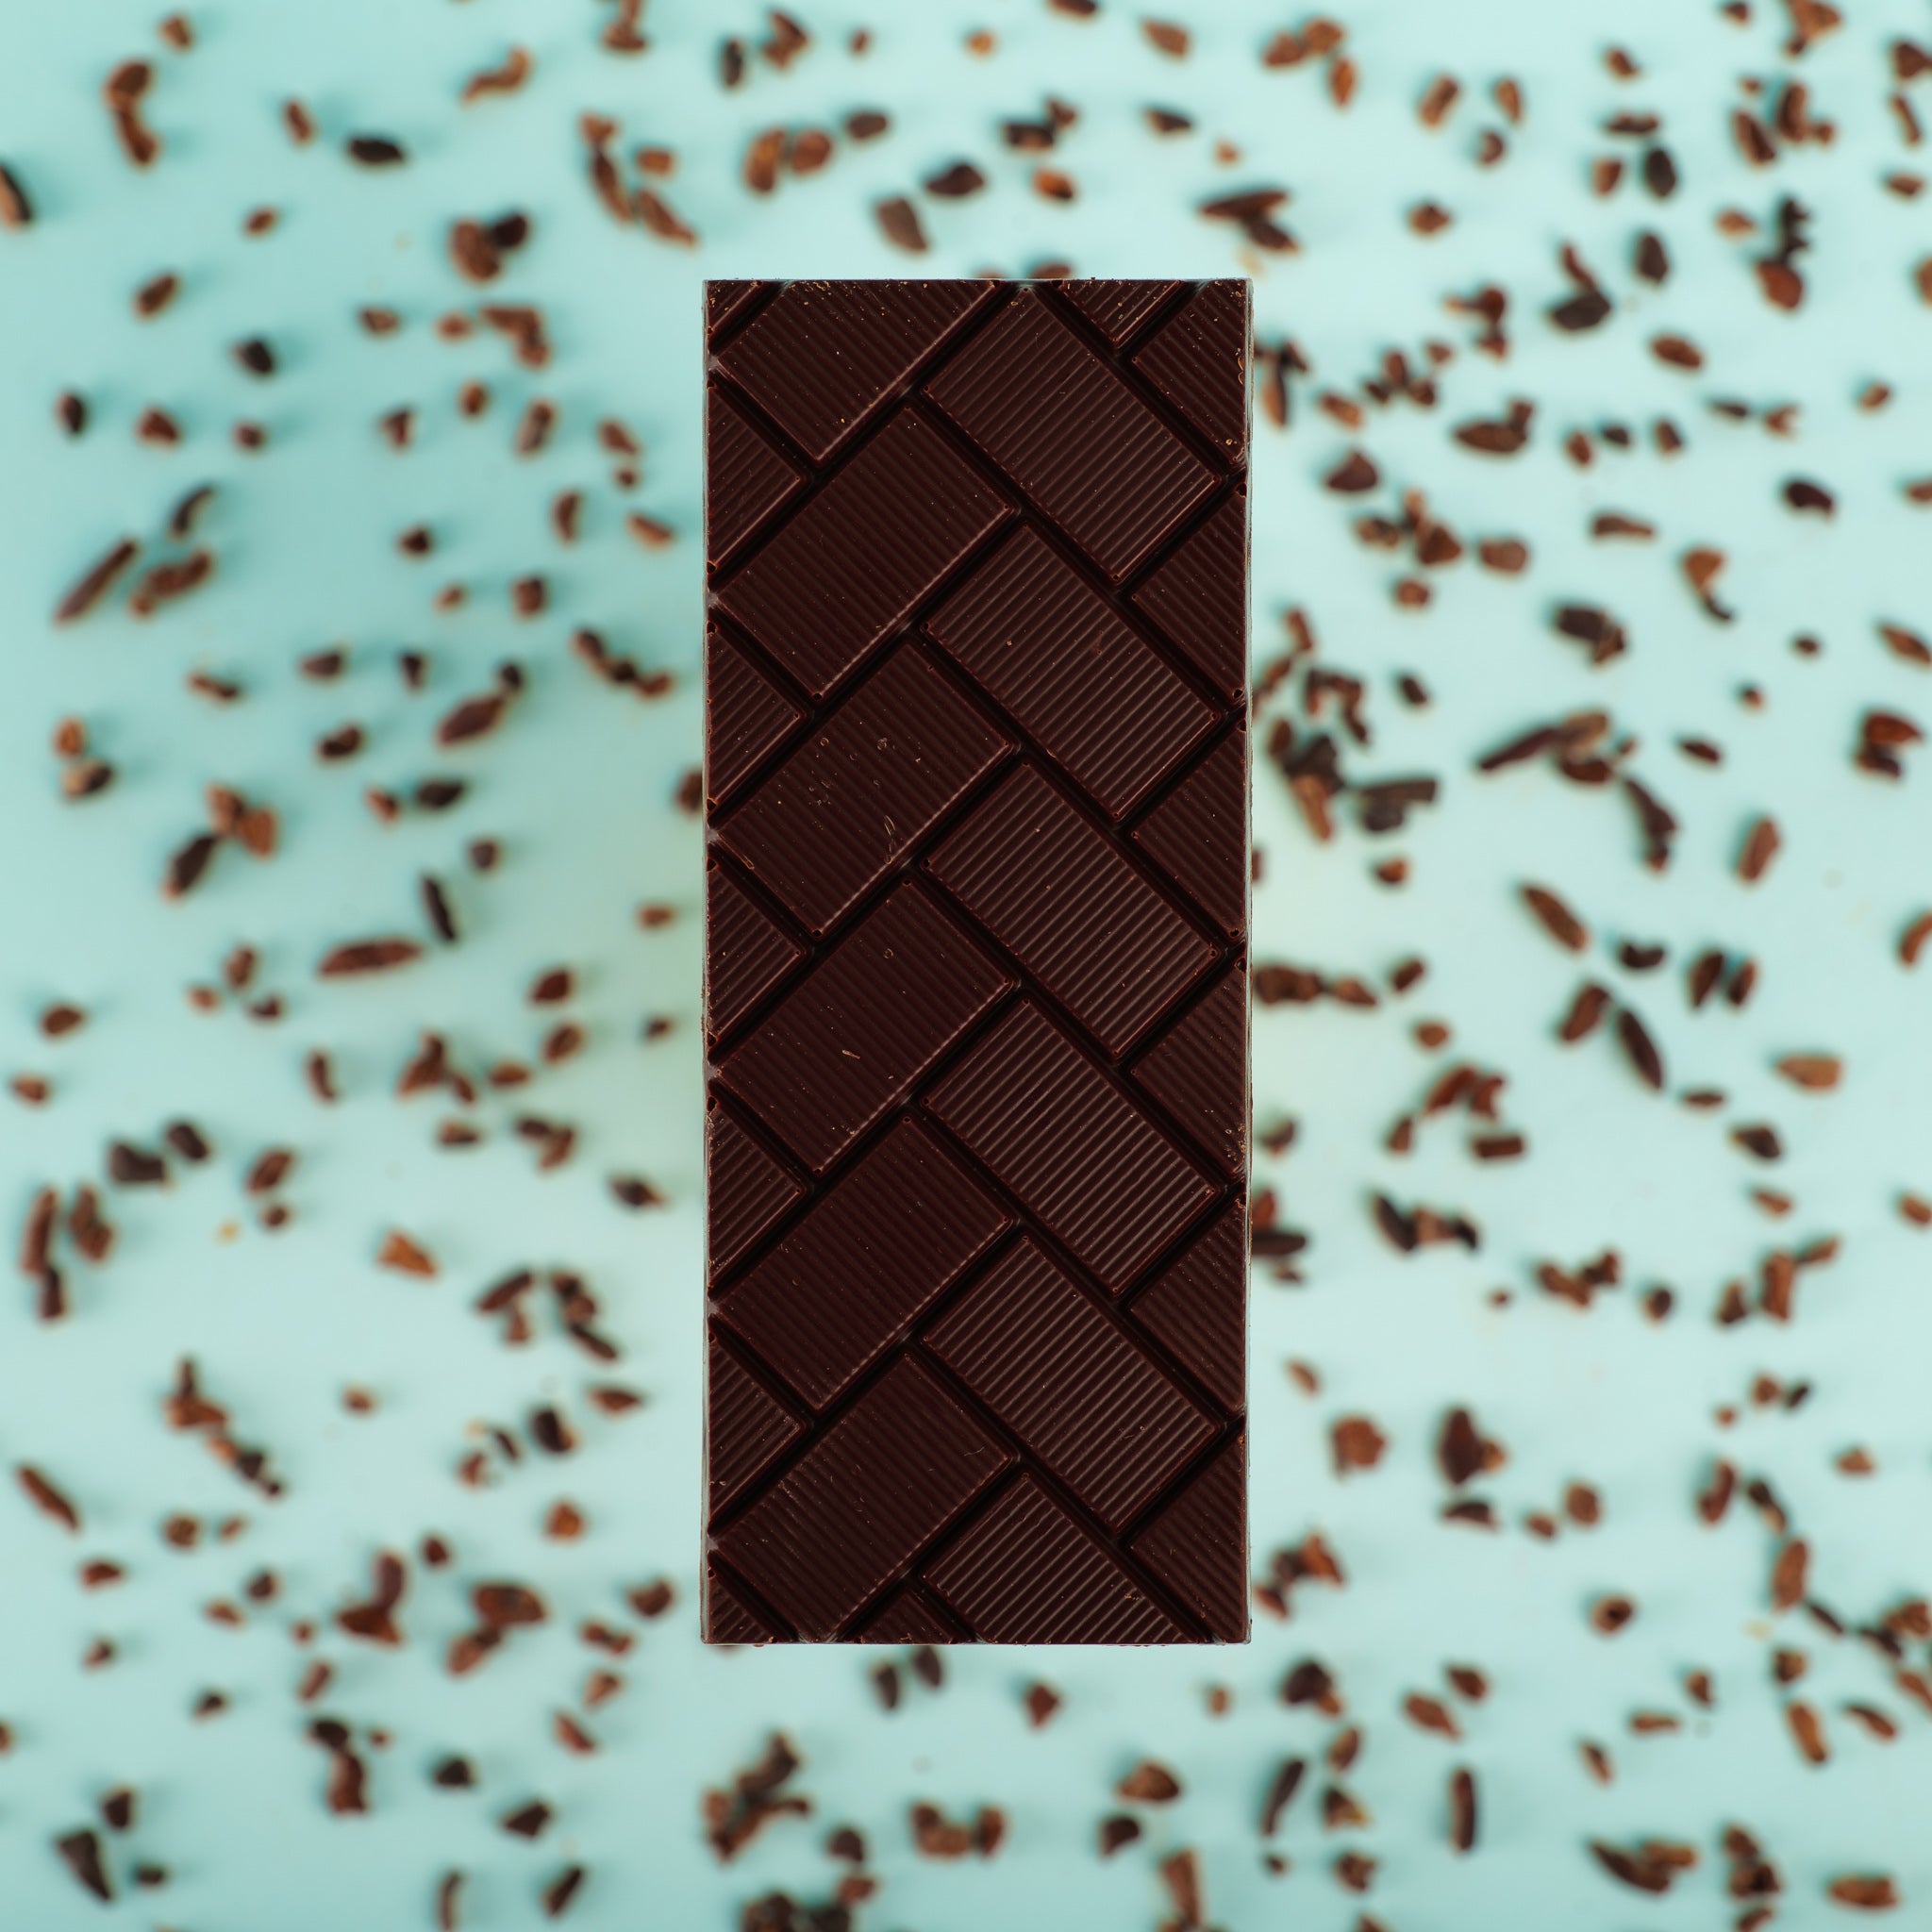 the Tanzania bar lies on a blue background surrounded by cocoa nibs